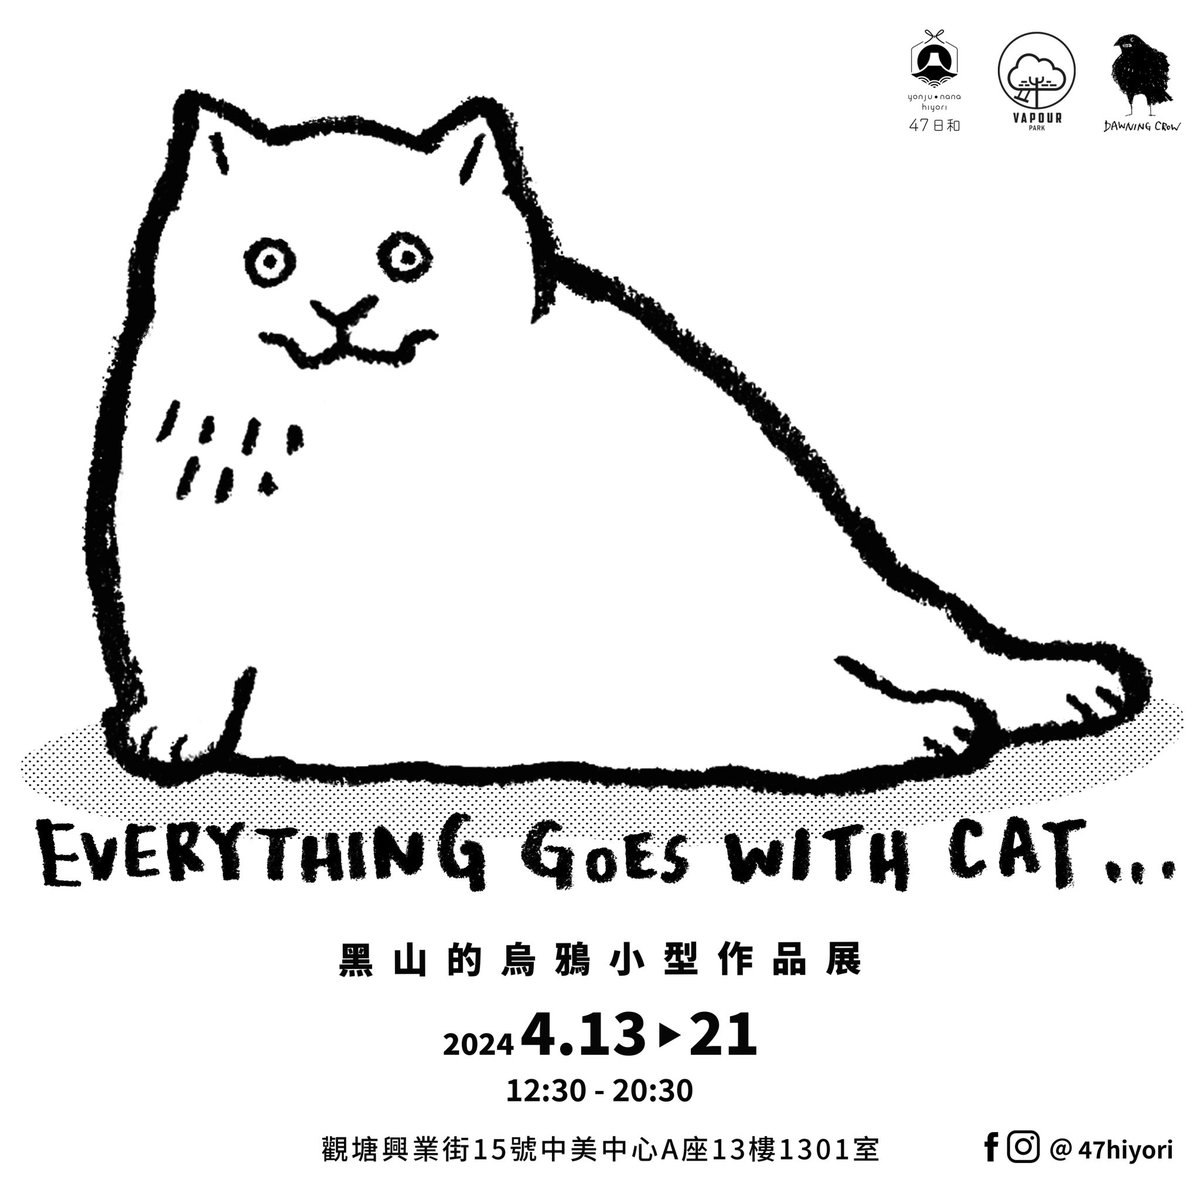 My small solo exhibition 《Everything goes with cat…》will held in Hong Kong on 13-21 April in the shop 47hiyori.com. Also release of my first figure toy made by vapourpark.com ! More news coming soon!